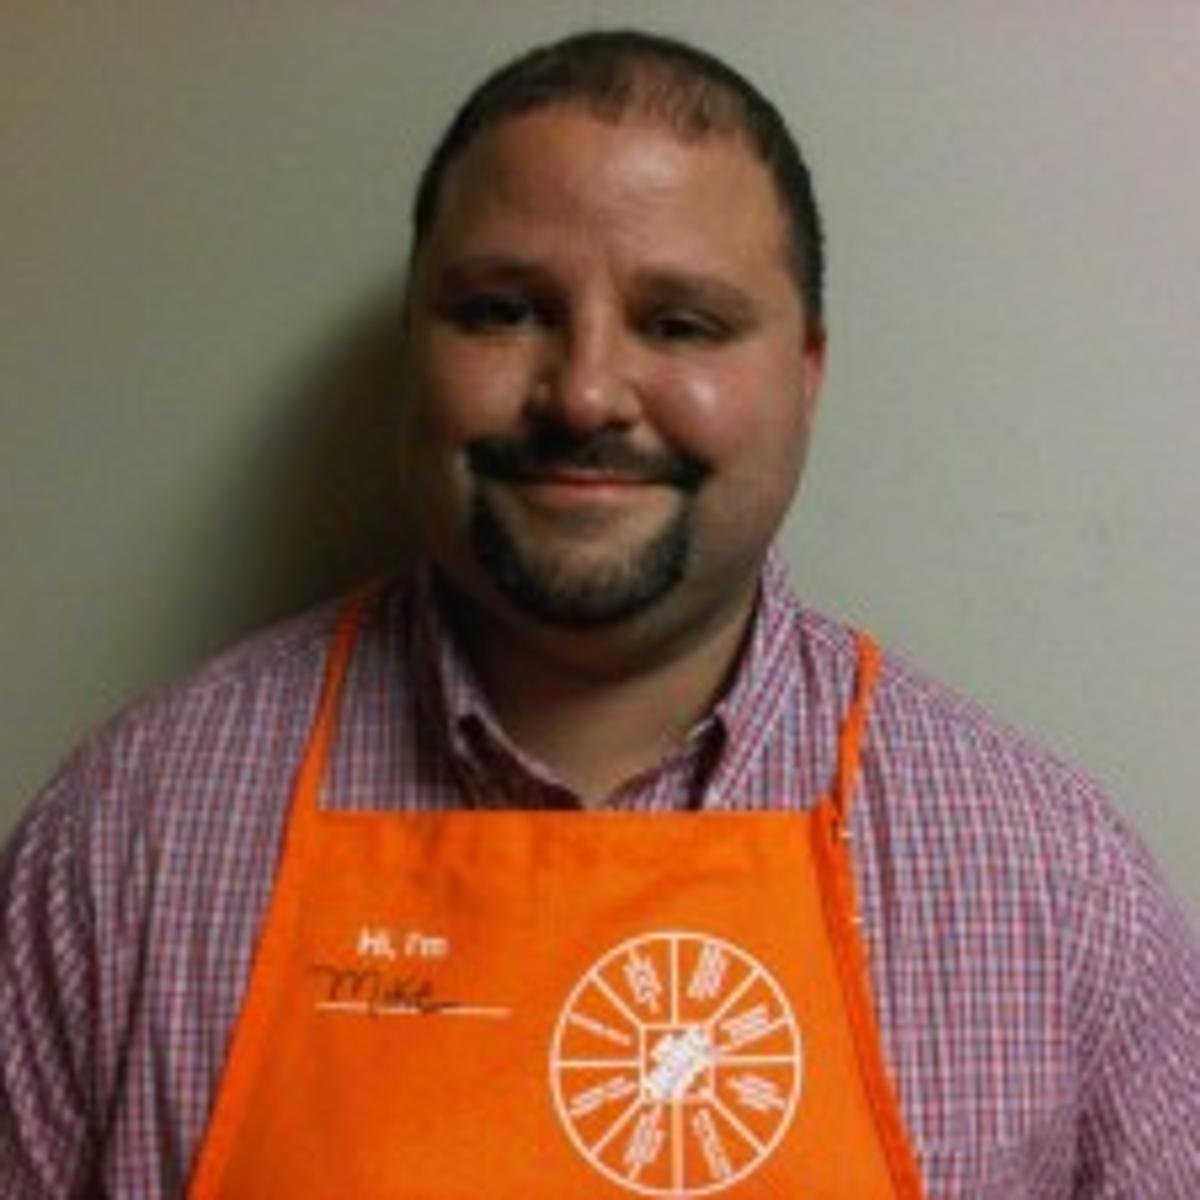 On The Rise: Assistant manager in Vineland finds Home Depot to be ...